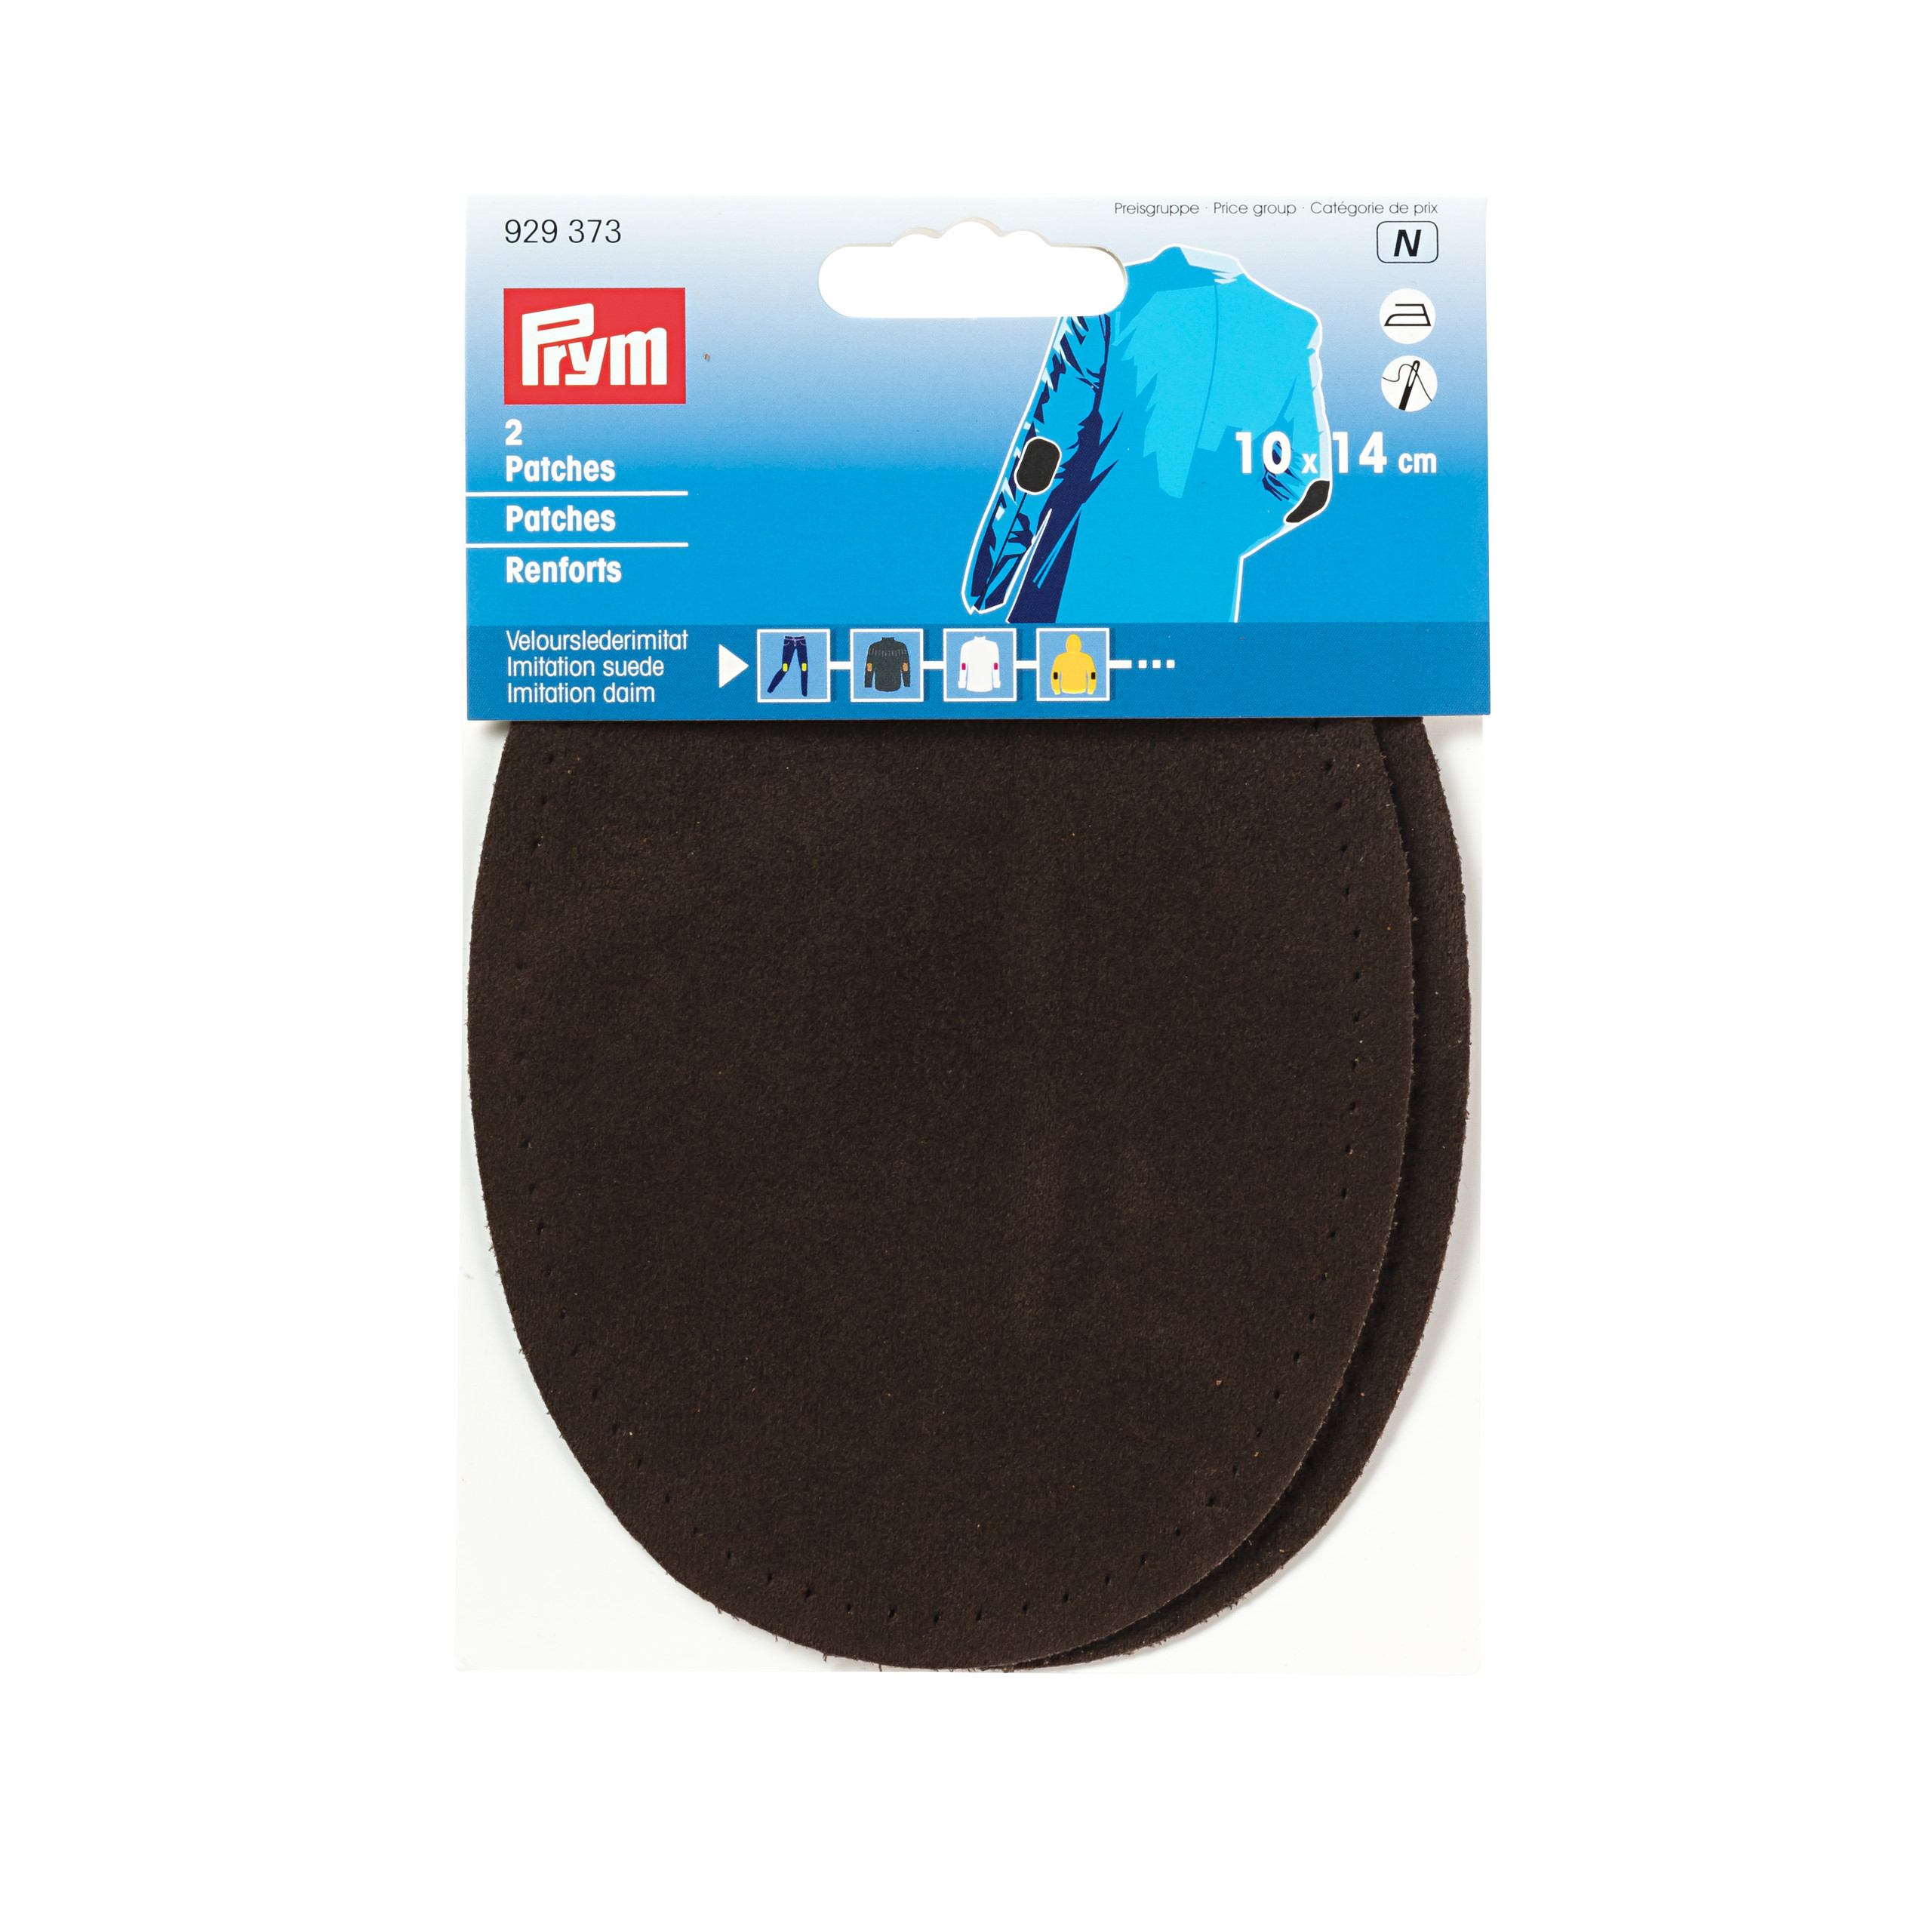 Patches imitation suede for ironing/sewing on 10 x 14 cm dark brown, 2 St